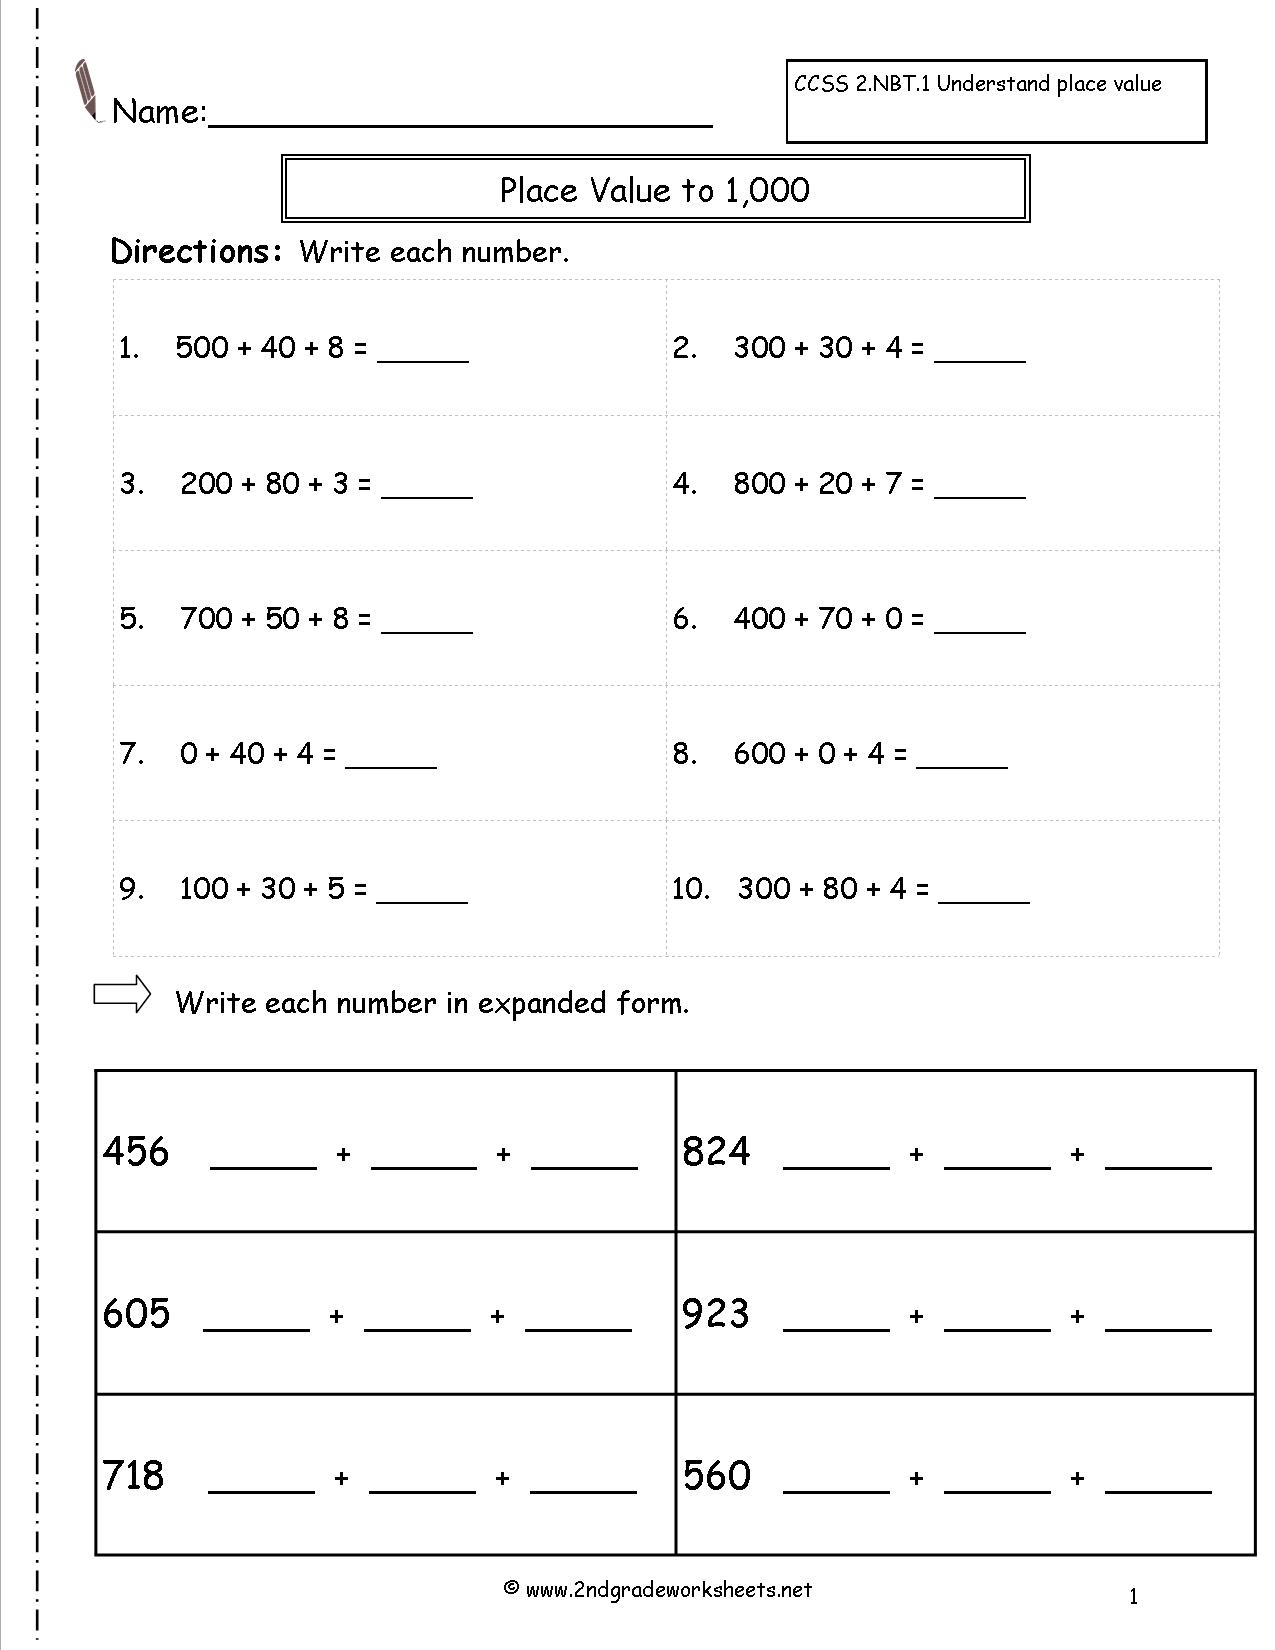 15 Best Images of Second Grade Writing Worksheets - Free ...